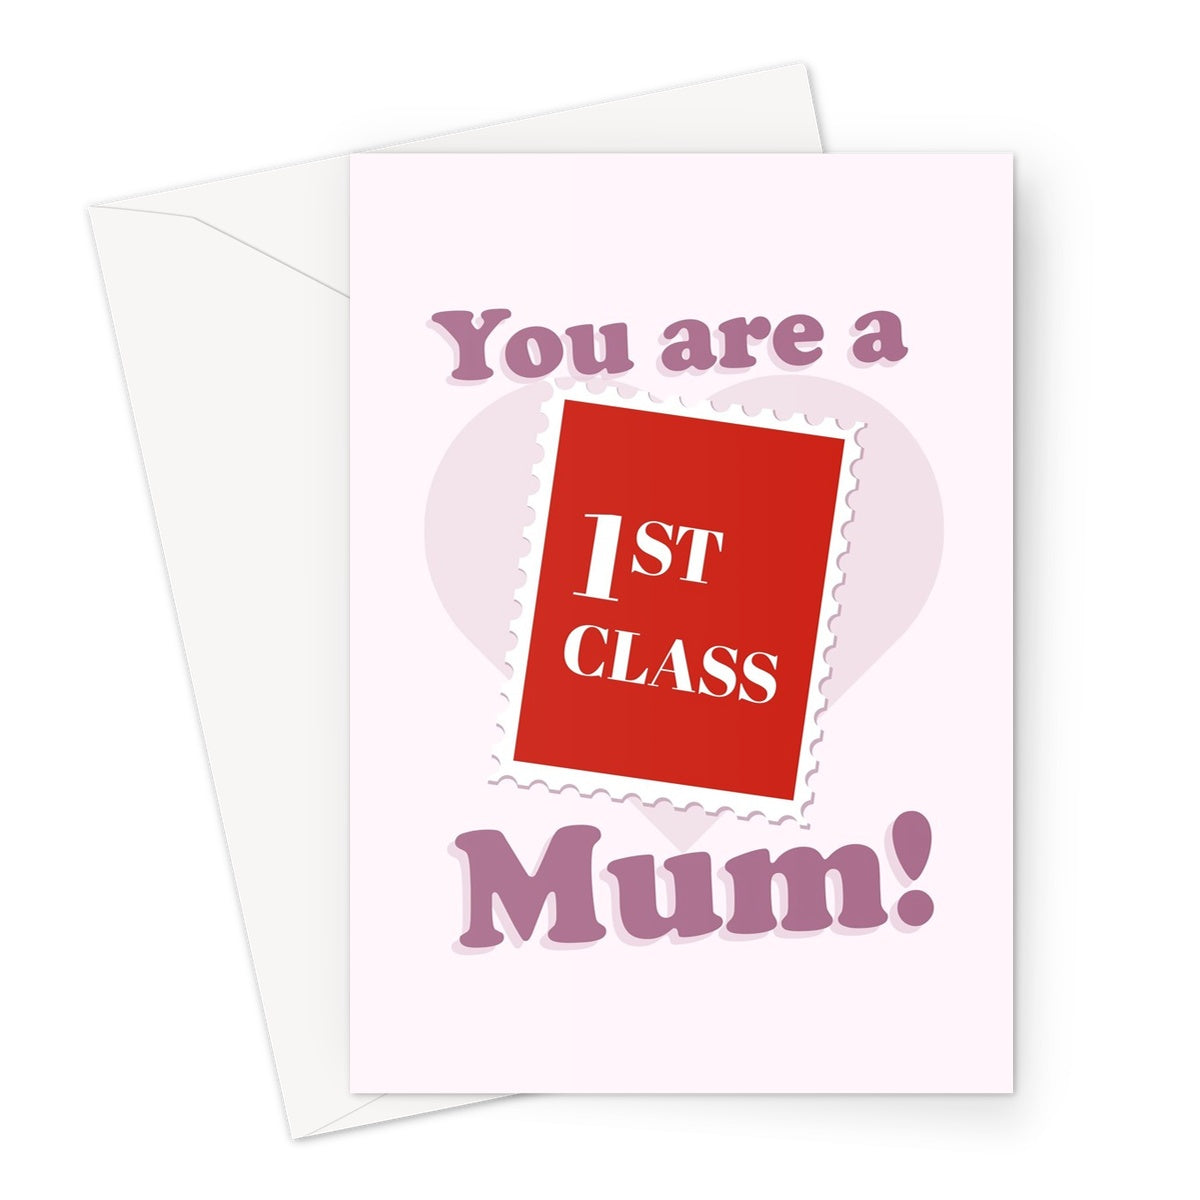 You Are a First Class Mum Cute Stamp Mother's Day Greeting Card